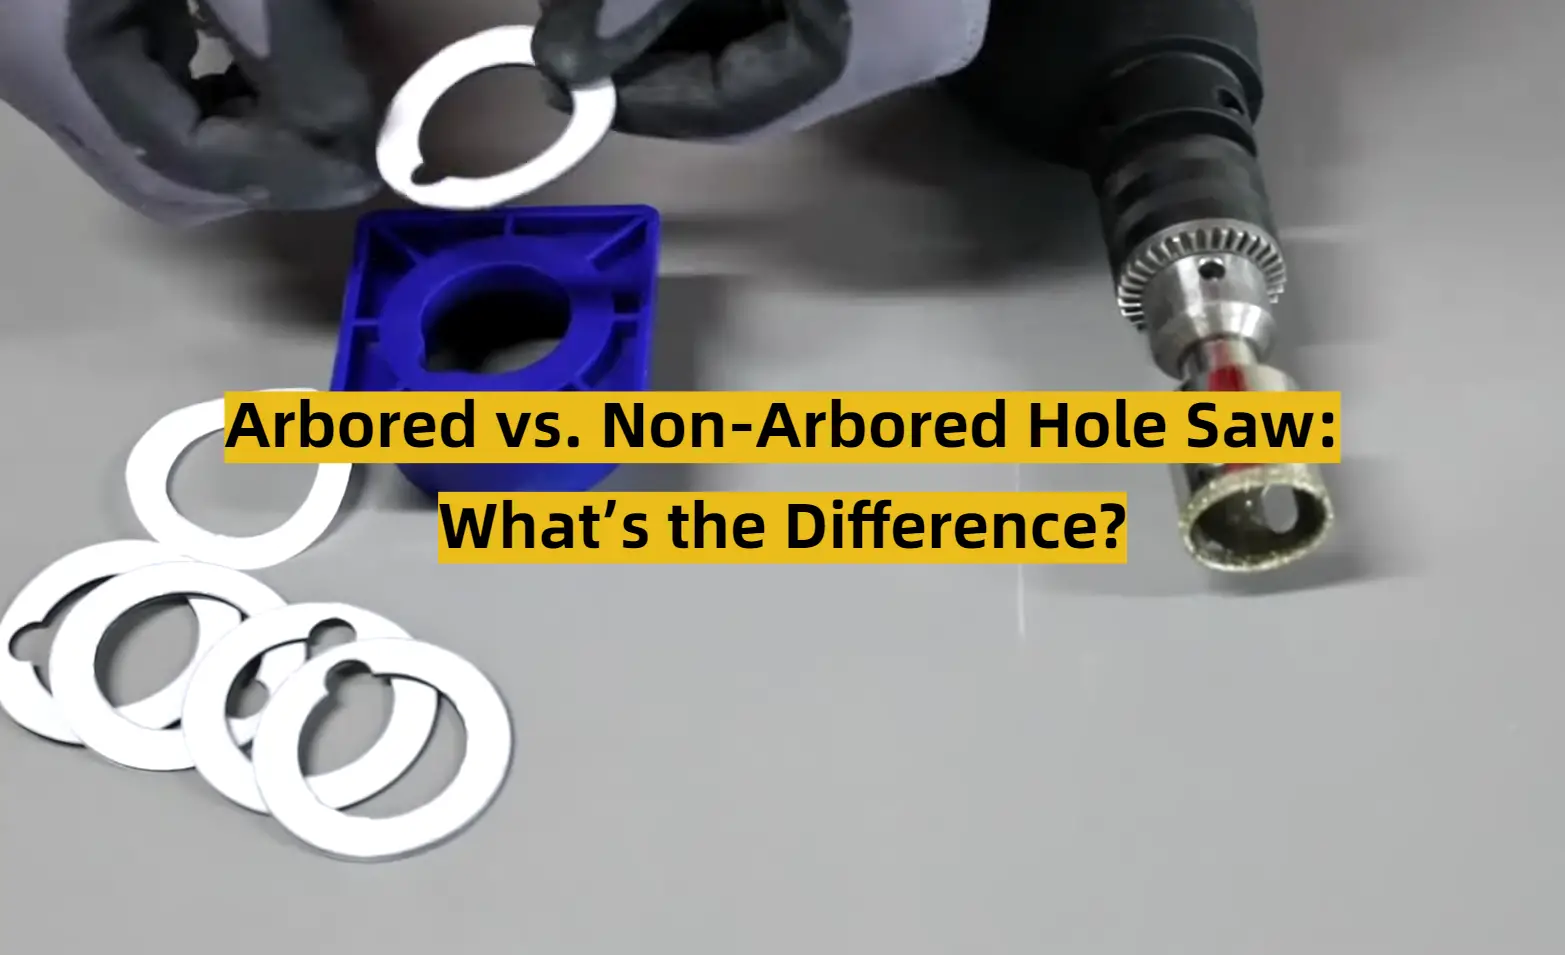 Arbored vs. Non-Arbored Hole Saw: What’s the Difference?